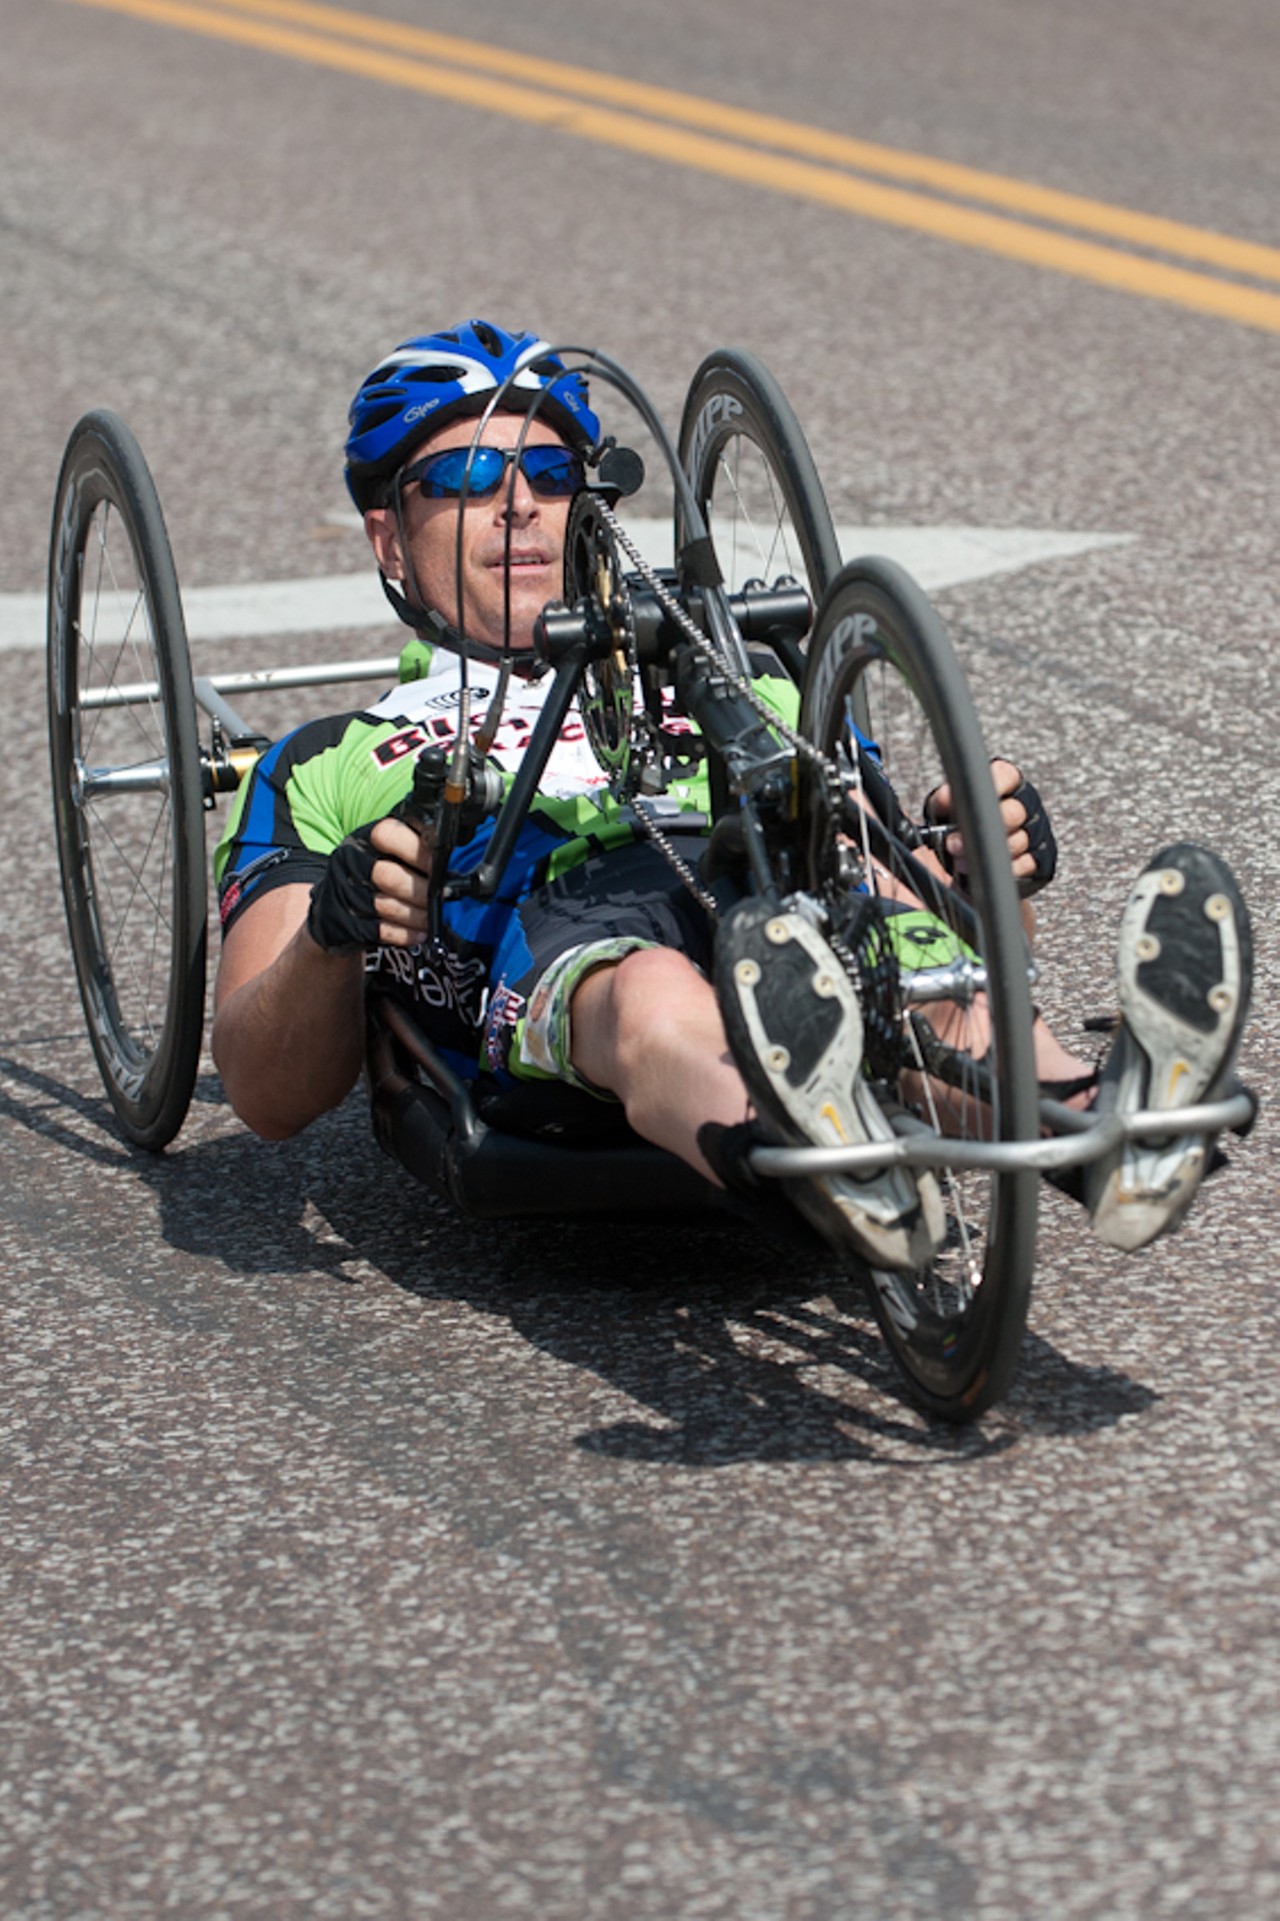 U.S. Hand Cyclist Brian Mitchell takes home the victory.